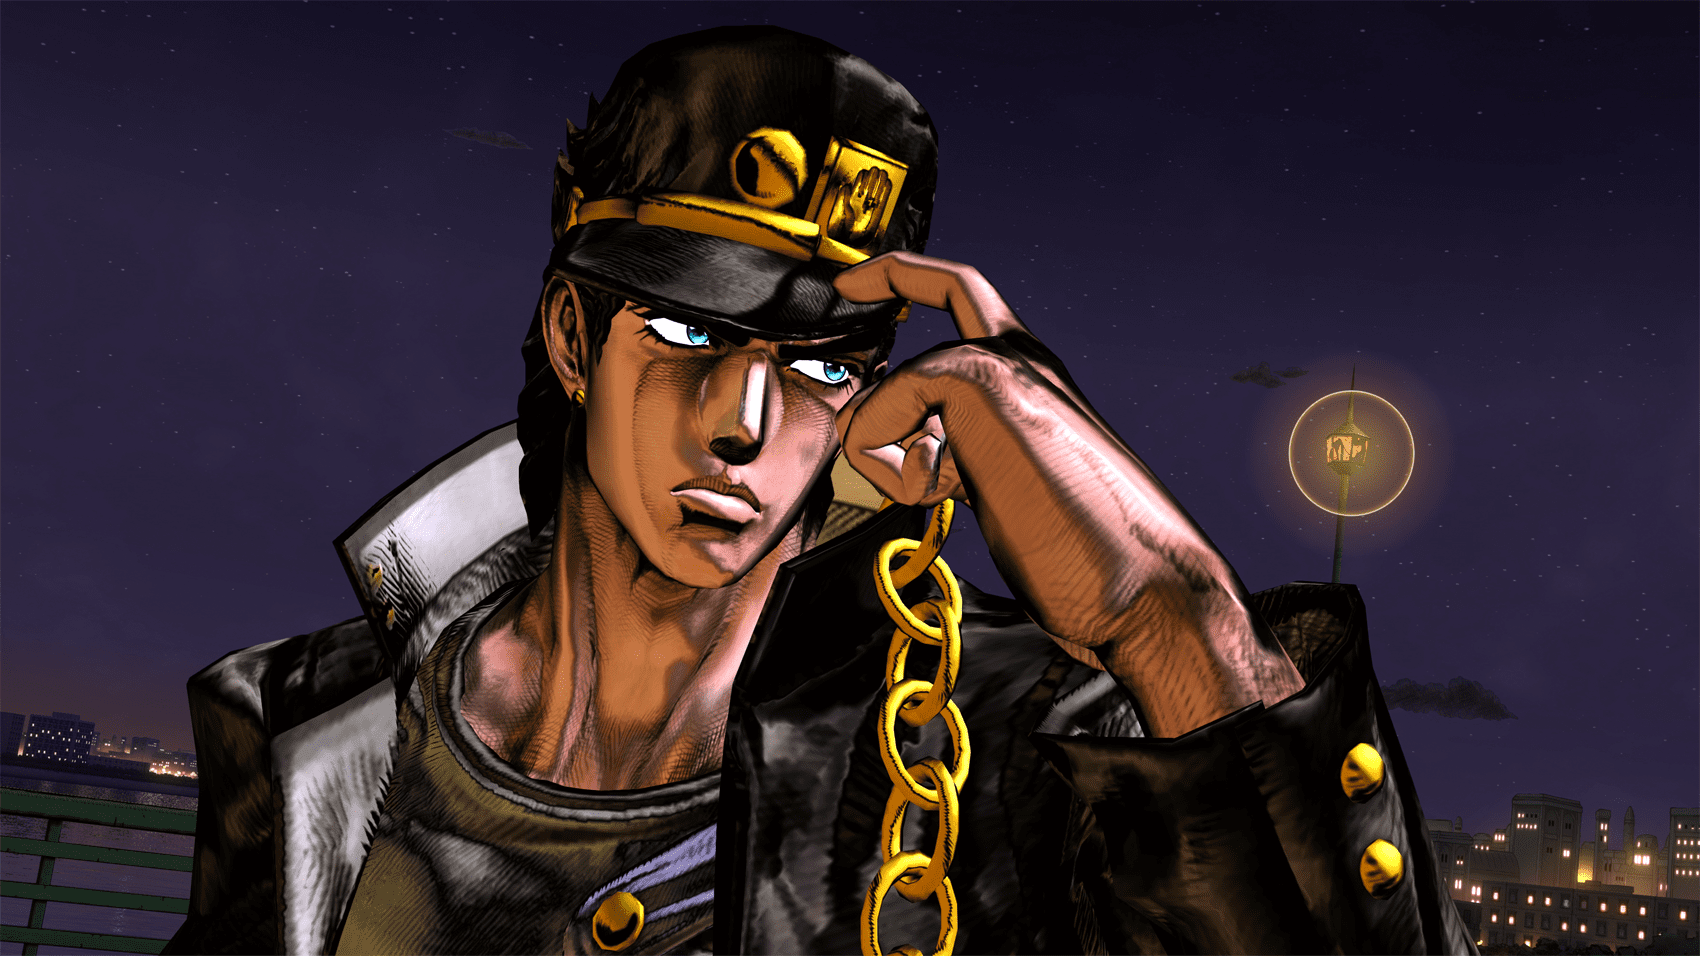 Create your dream matches with JoJos Bizarre Adventure All-Star Battle R, available today!